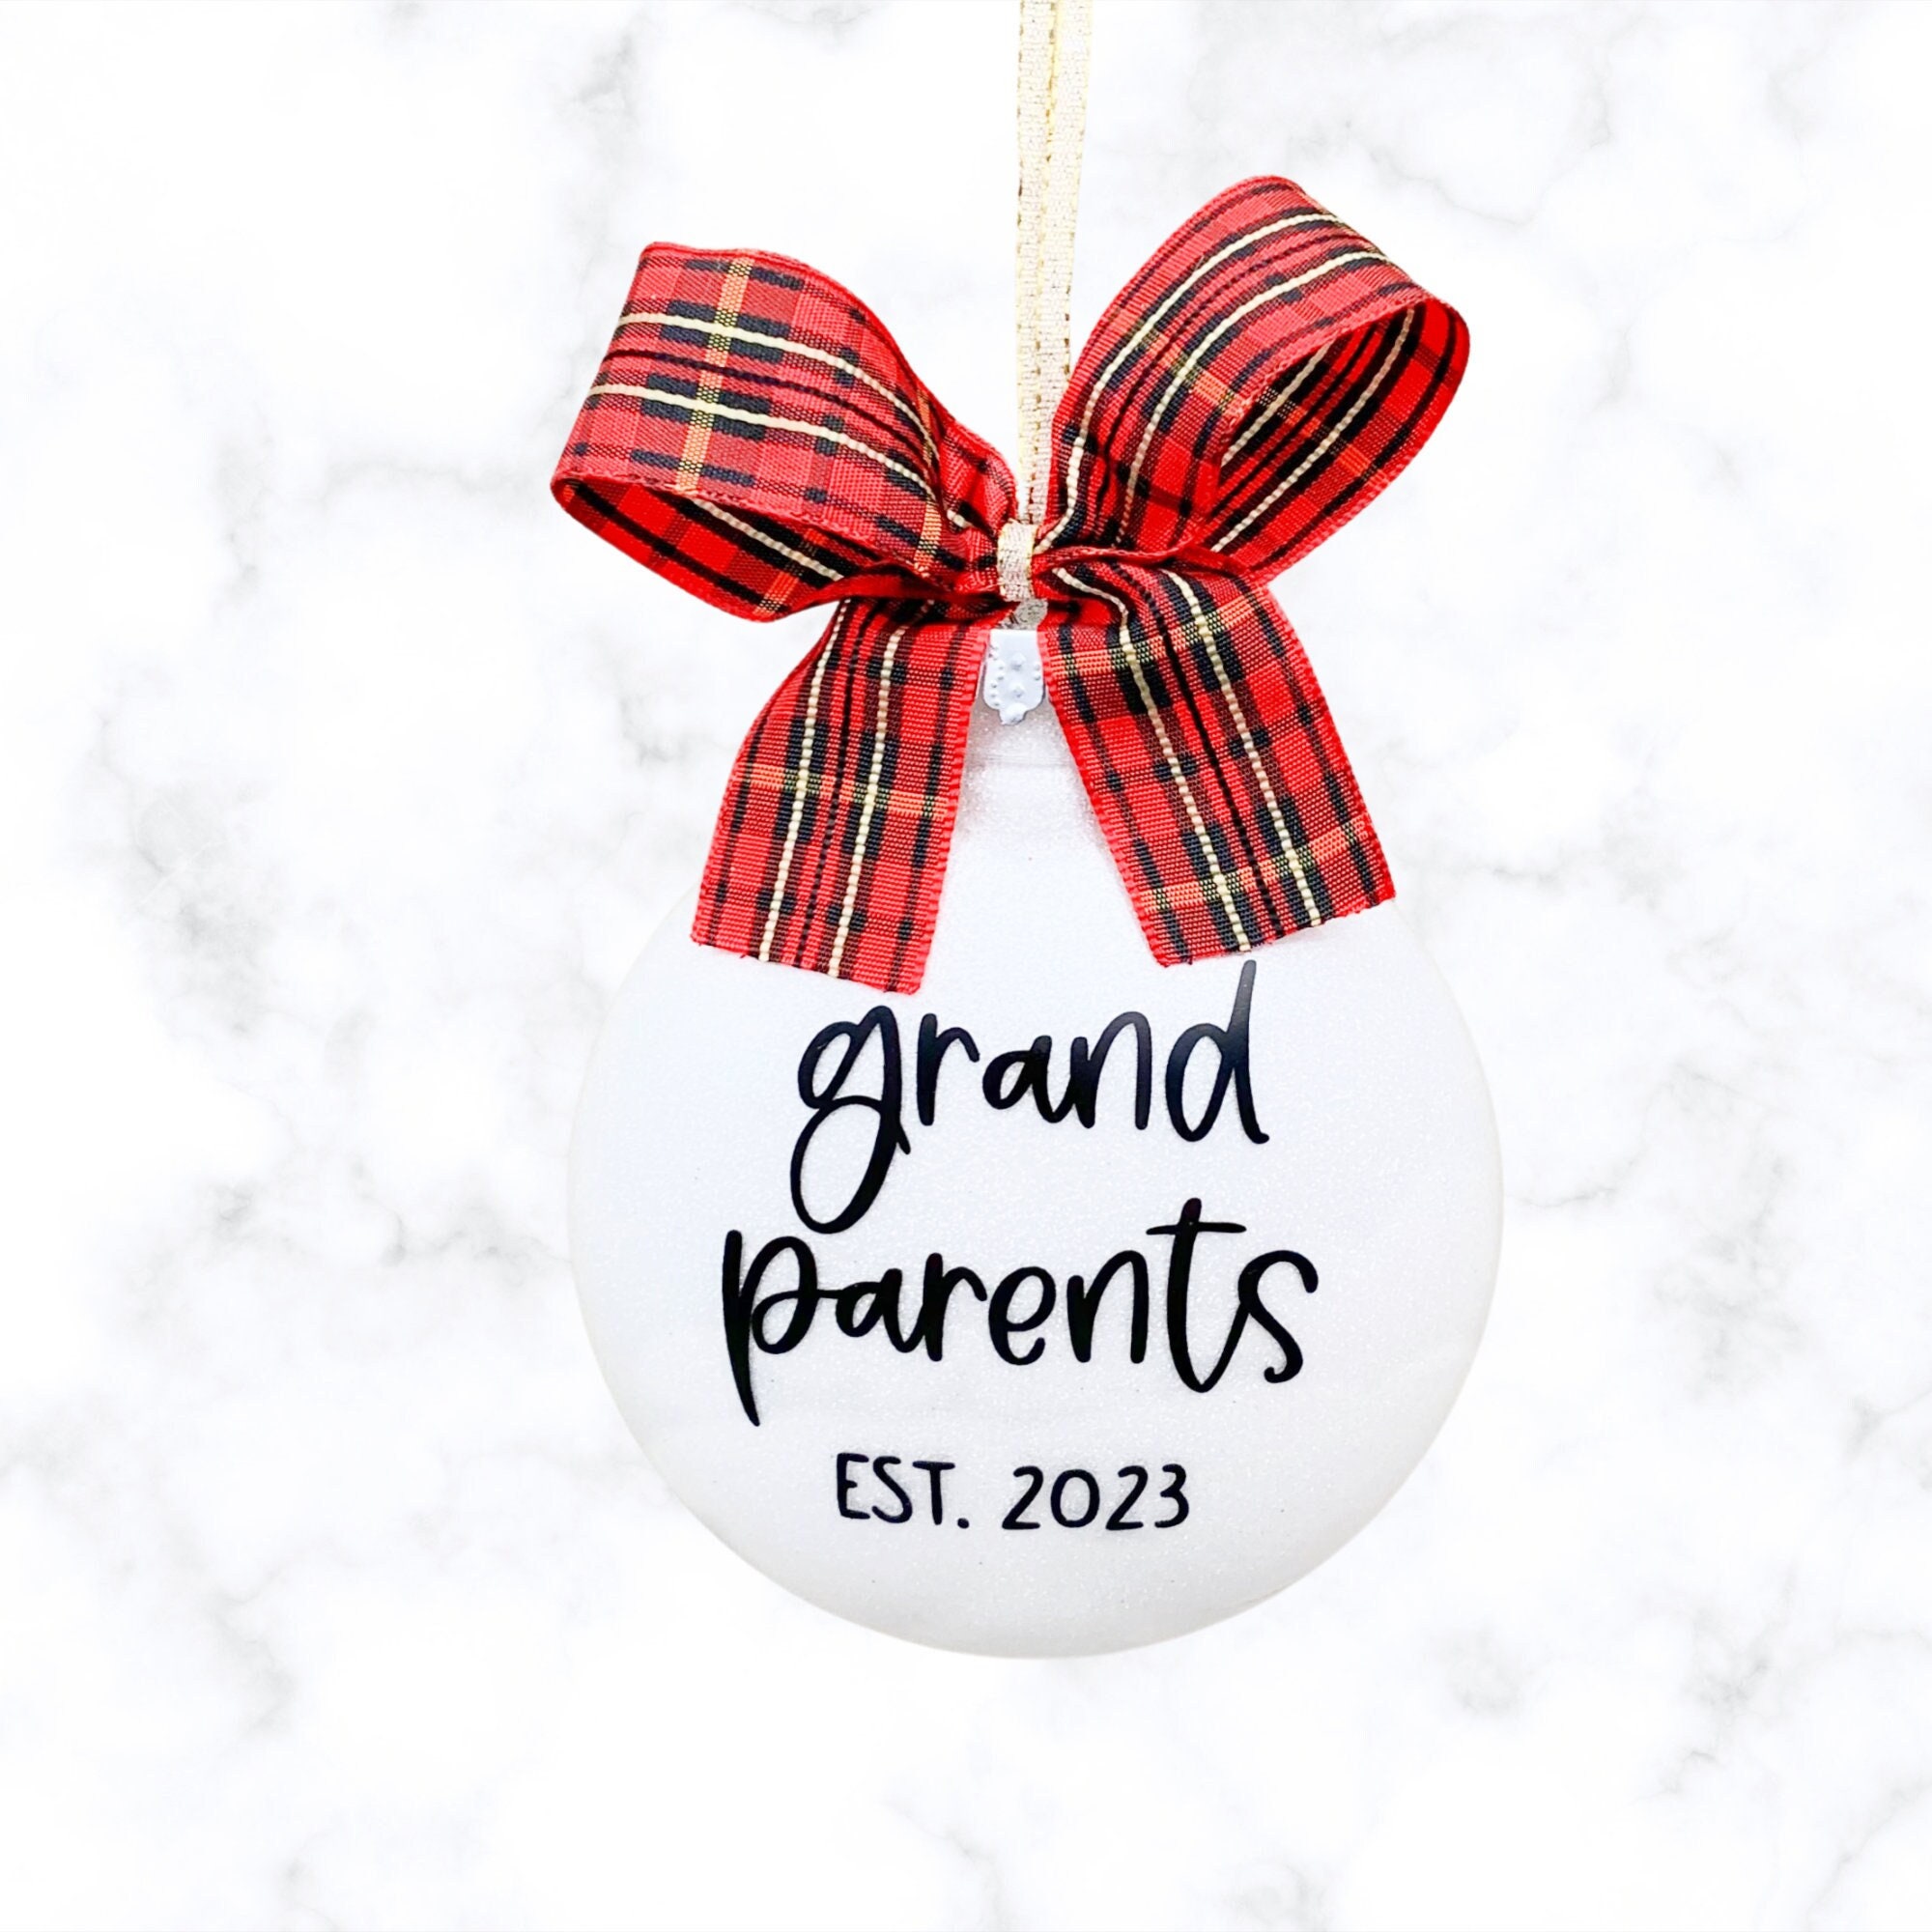 Great Grandma Gift for Great Grandma to be Pregnancy Reveal Gift